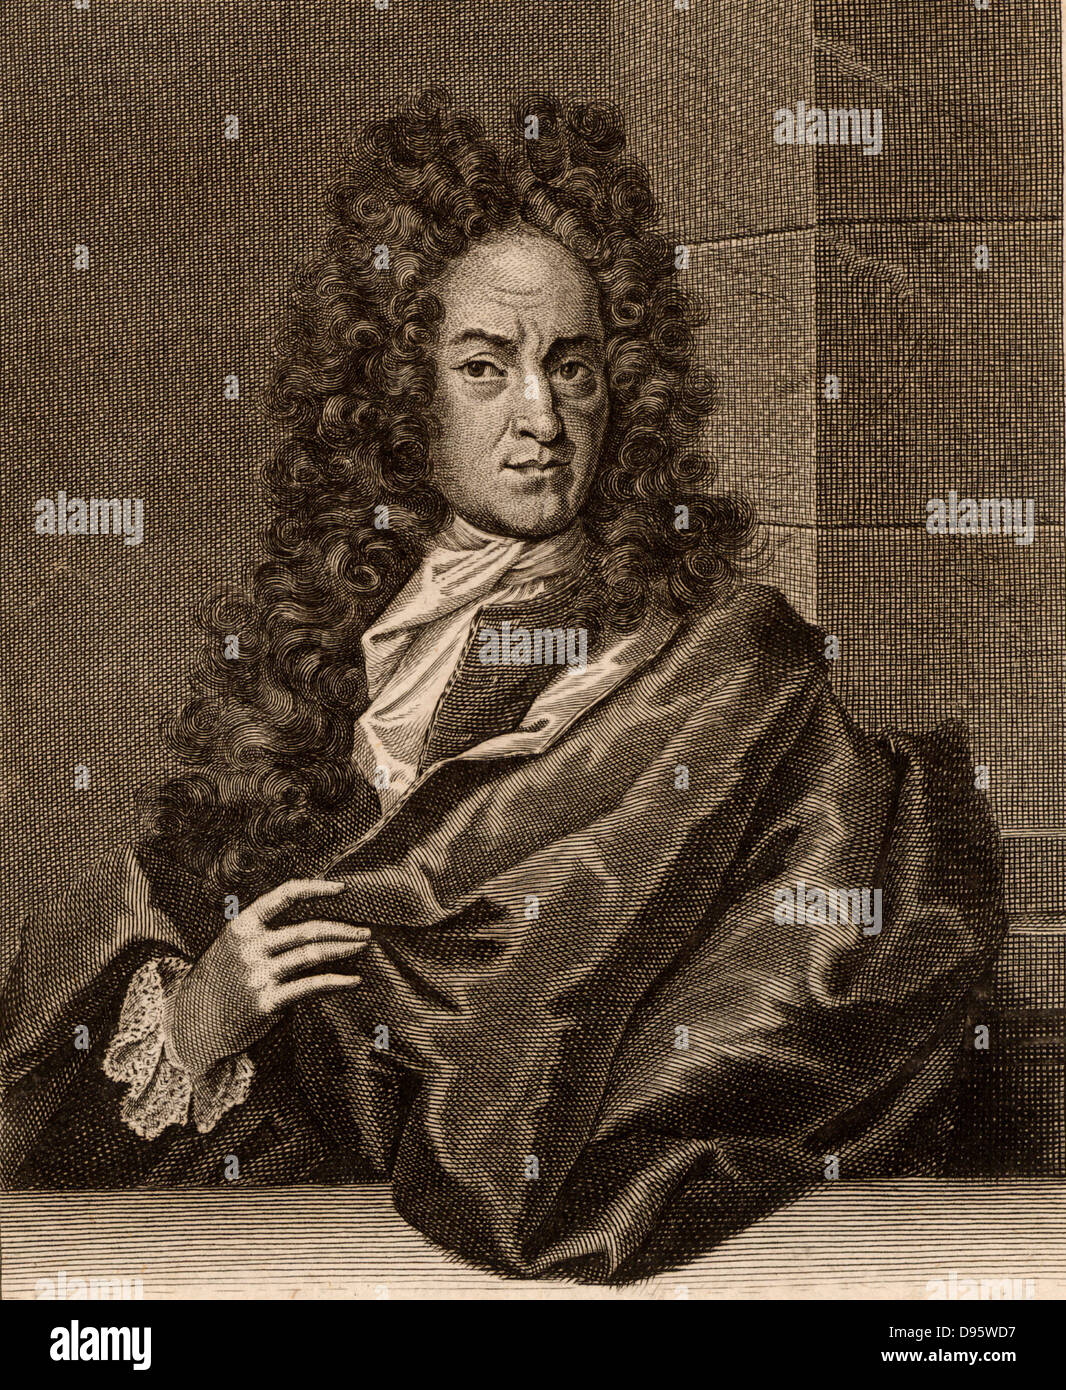 Georg Ernst Stahl (1660-1734) German chemist and medical theorist.  Proposed the phlogiston theory of combustion.  Engraving from his 'Opusculum Chymico-physico-medicum' (1715). Stock Photo